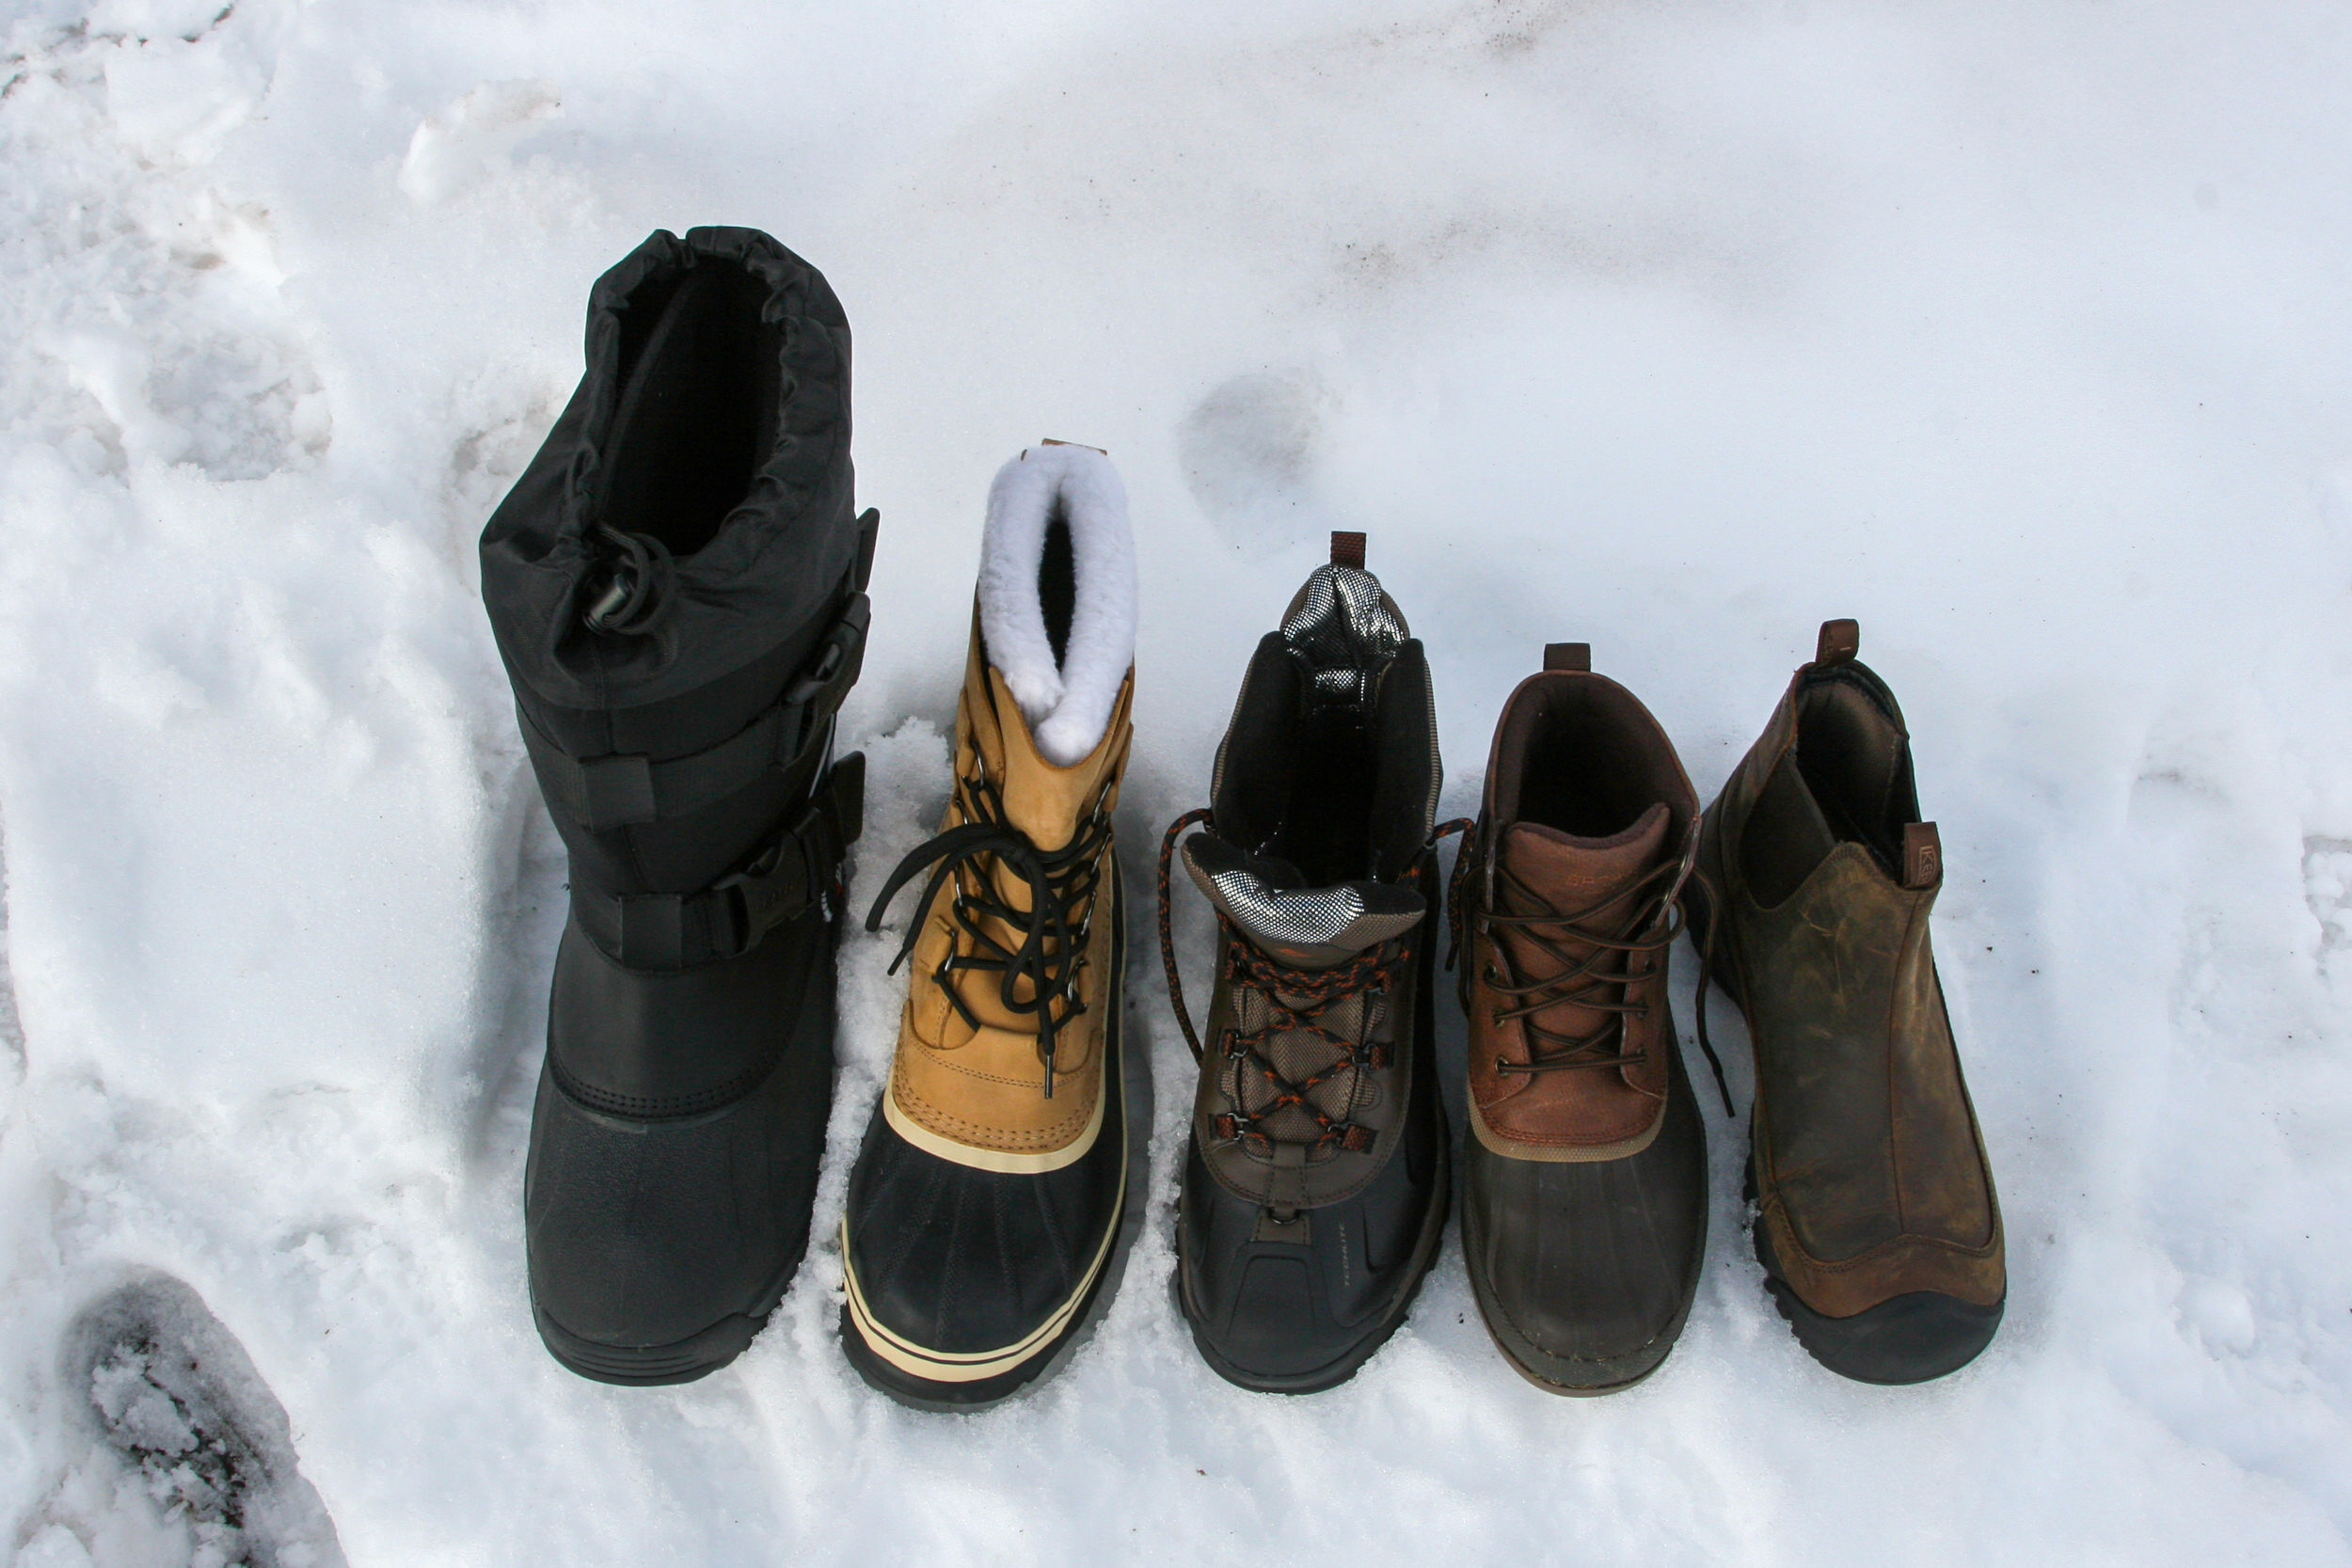 Most to least insulated from Left to Right - Baffin Impact - Sorel Caribou - Columbia Bugaboot Plus IV - Sperry Cold Bay Chukka - Keen Anchorage II